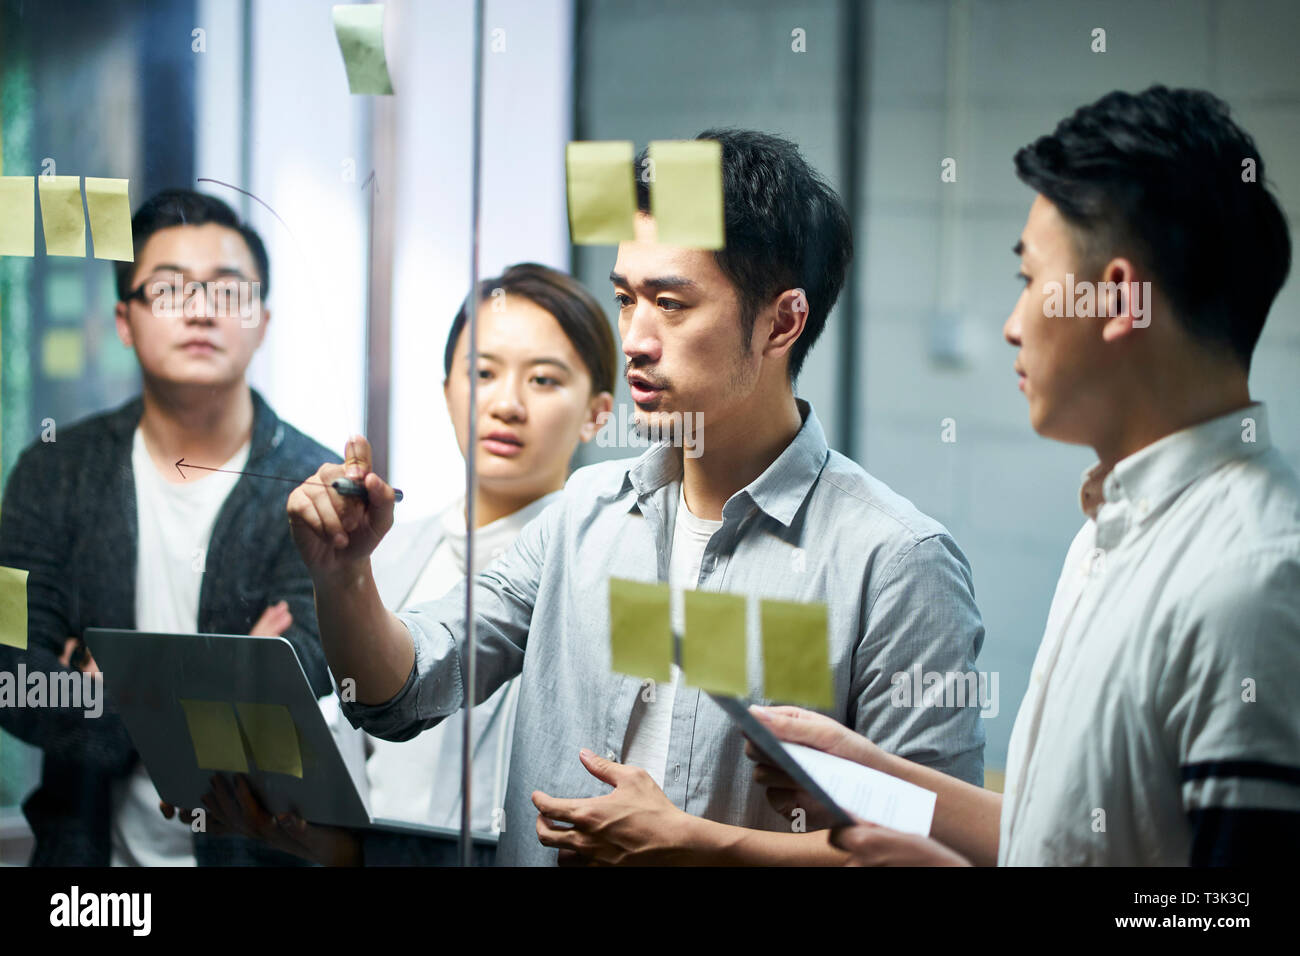 young asian entrepreneur of small company drawing a diagram on glass during team meeting discussing and analyzing business situation in office. Stock Photo